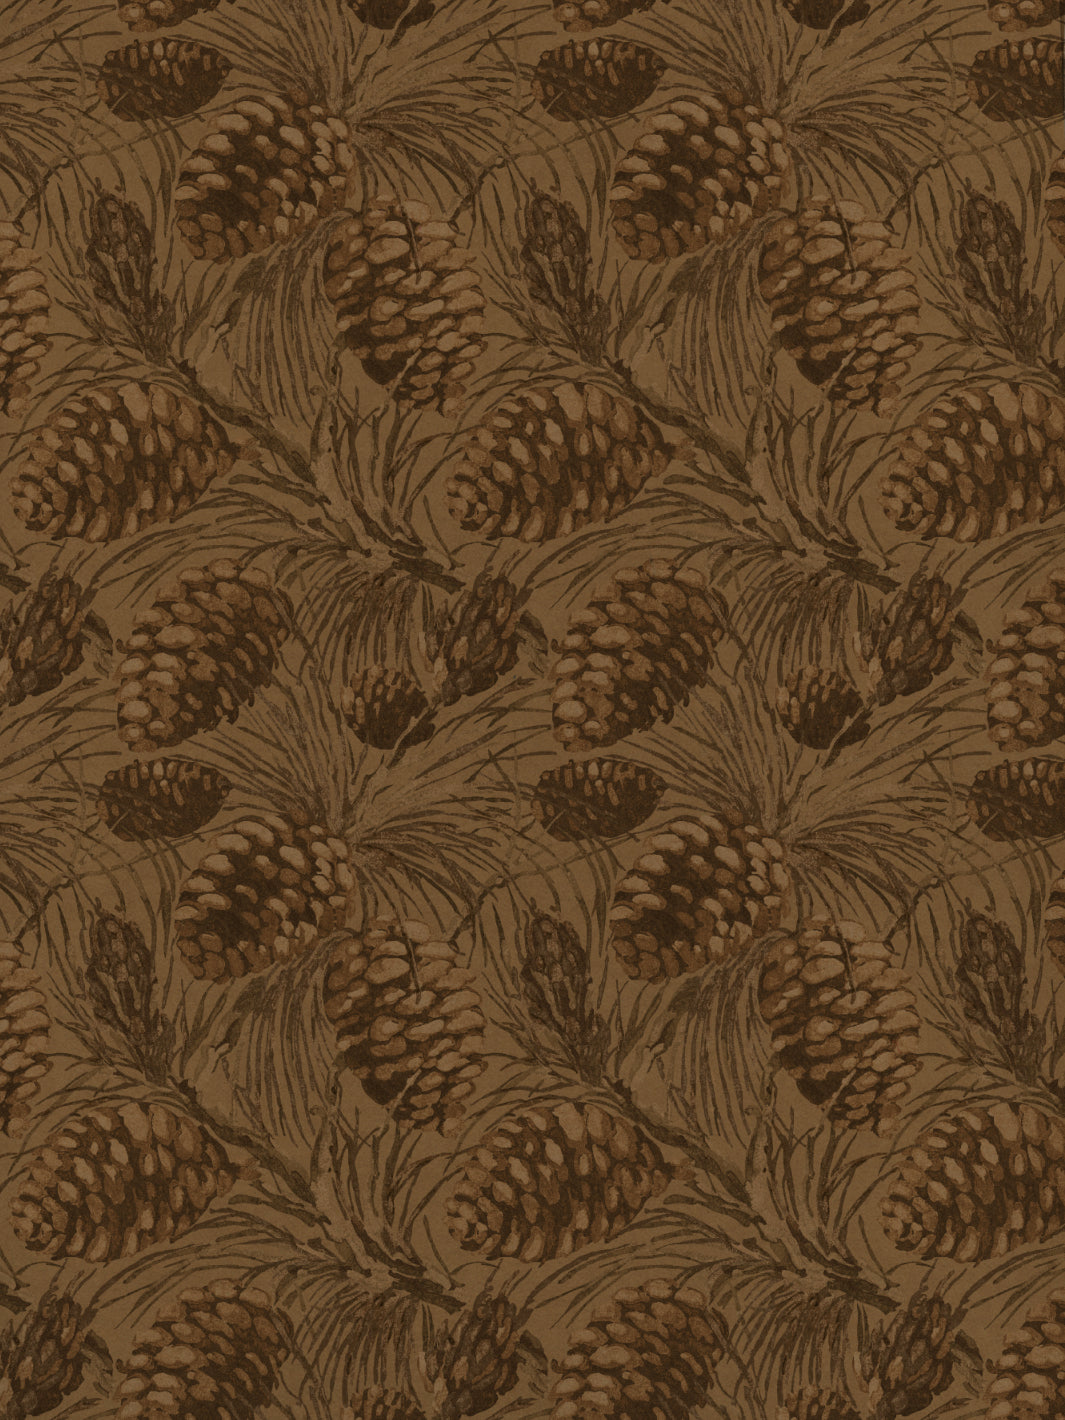 'Pinecones' Kraft Wallpaper by Nathan Turner - All Taupe